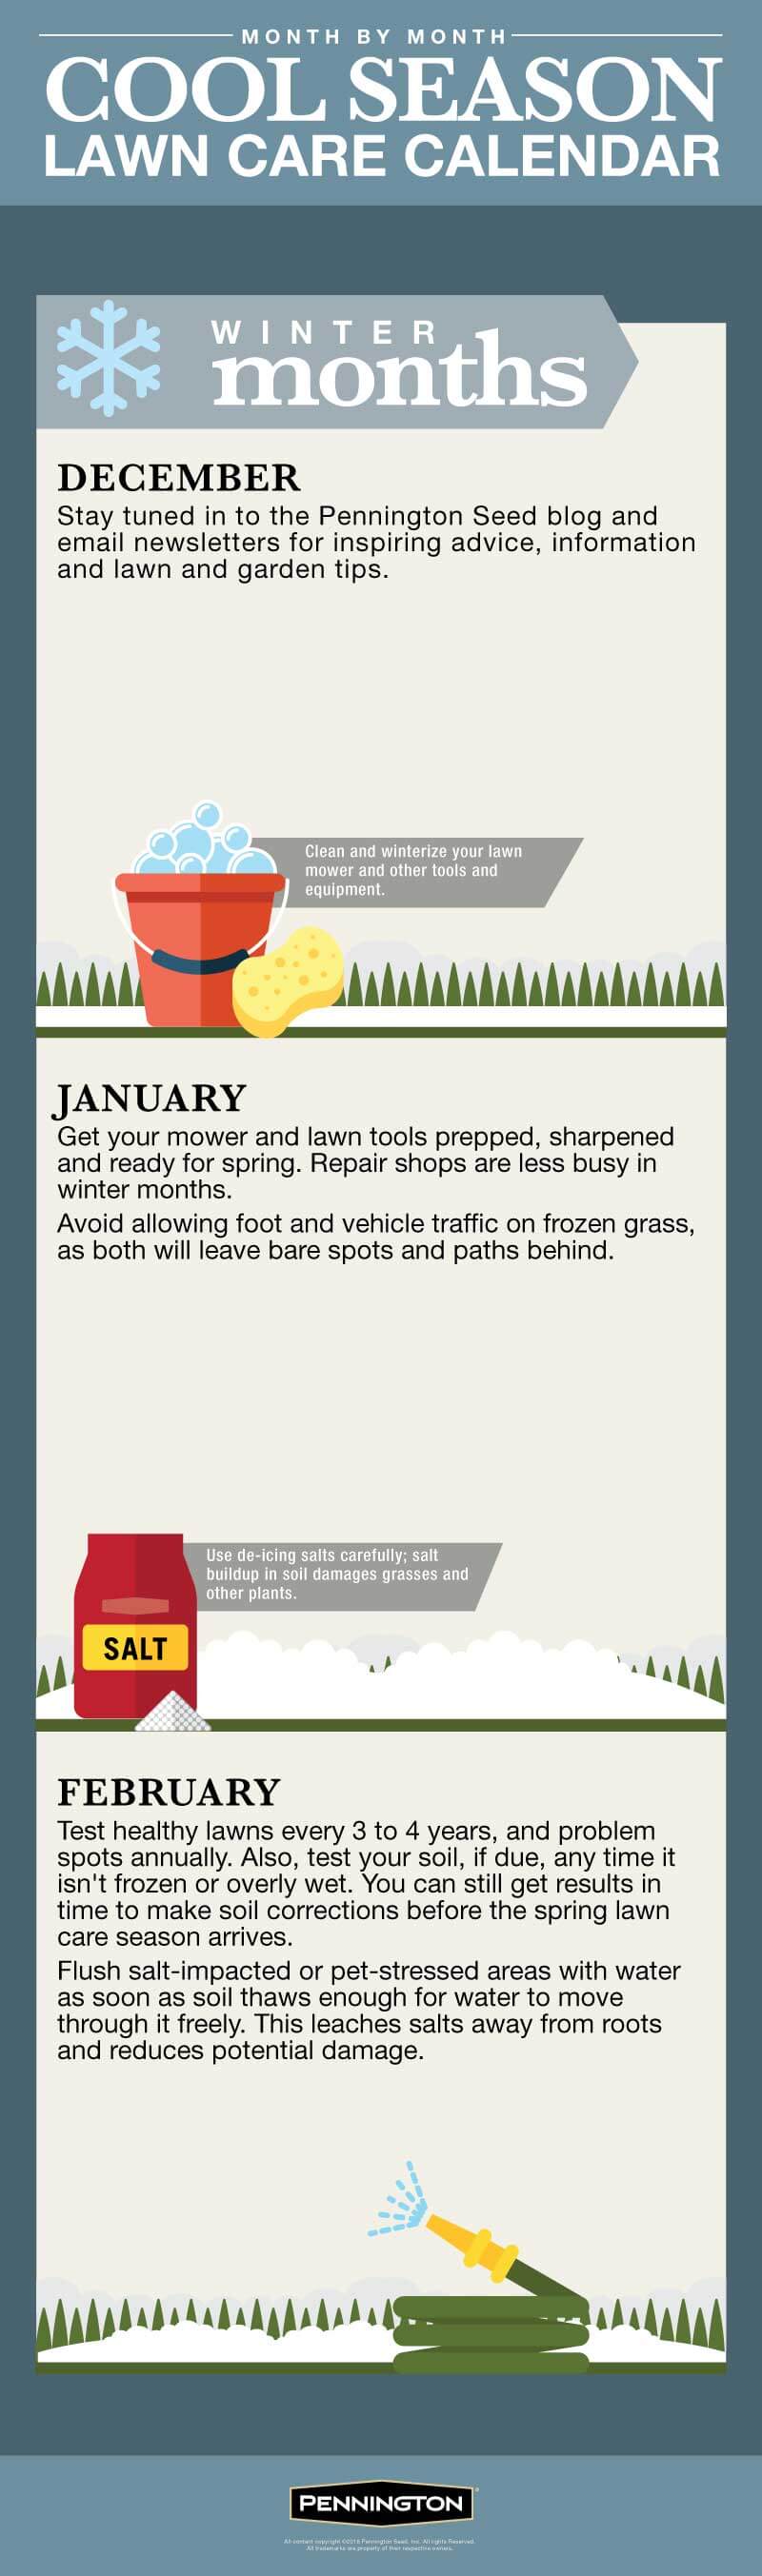 Lawn Care Calendar for CoolSeason Lawns Infographic